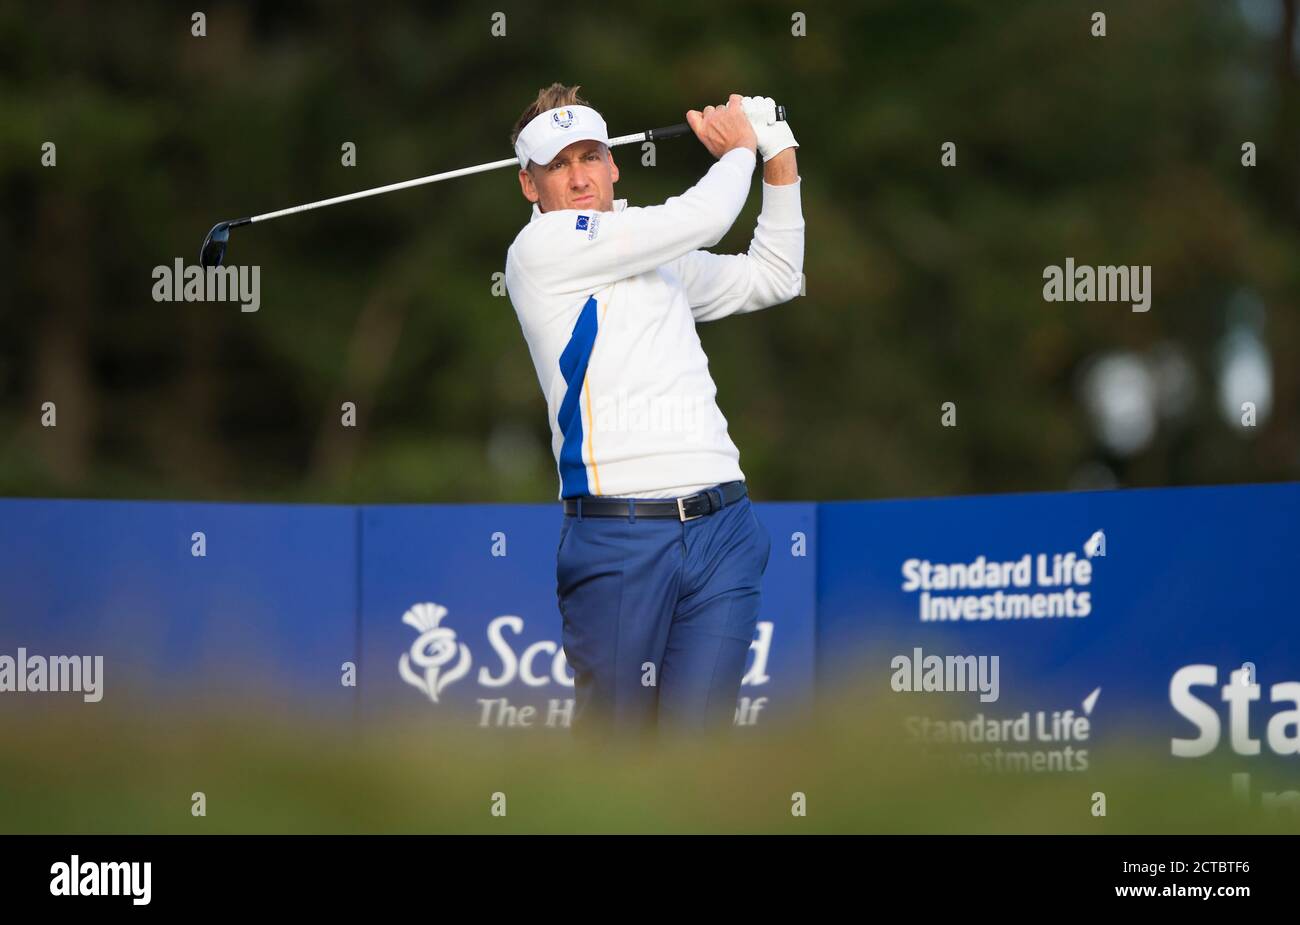 Ian Poulter The Ryder Cup 2014 Gleneagles, Perthshire, Scotland  Picture Credit : © Mark Pain / Alamy Stock Photo